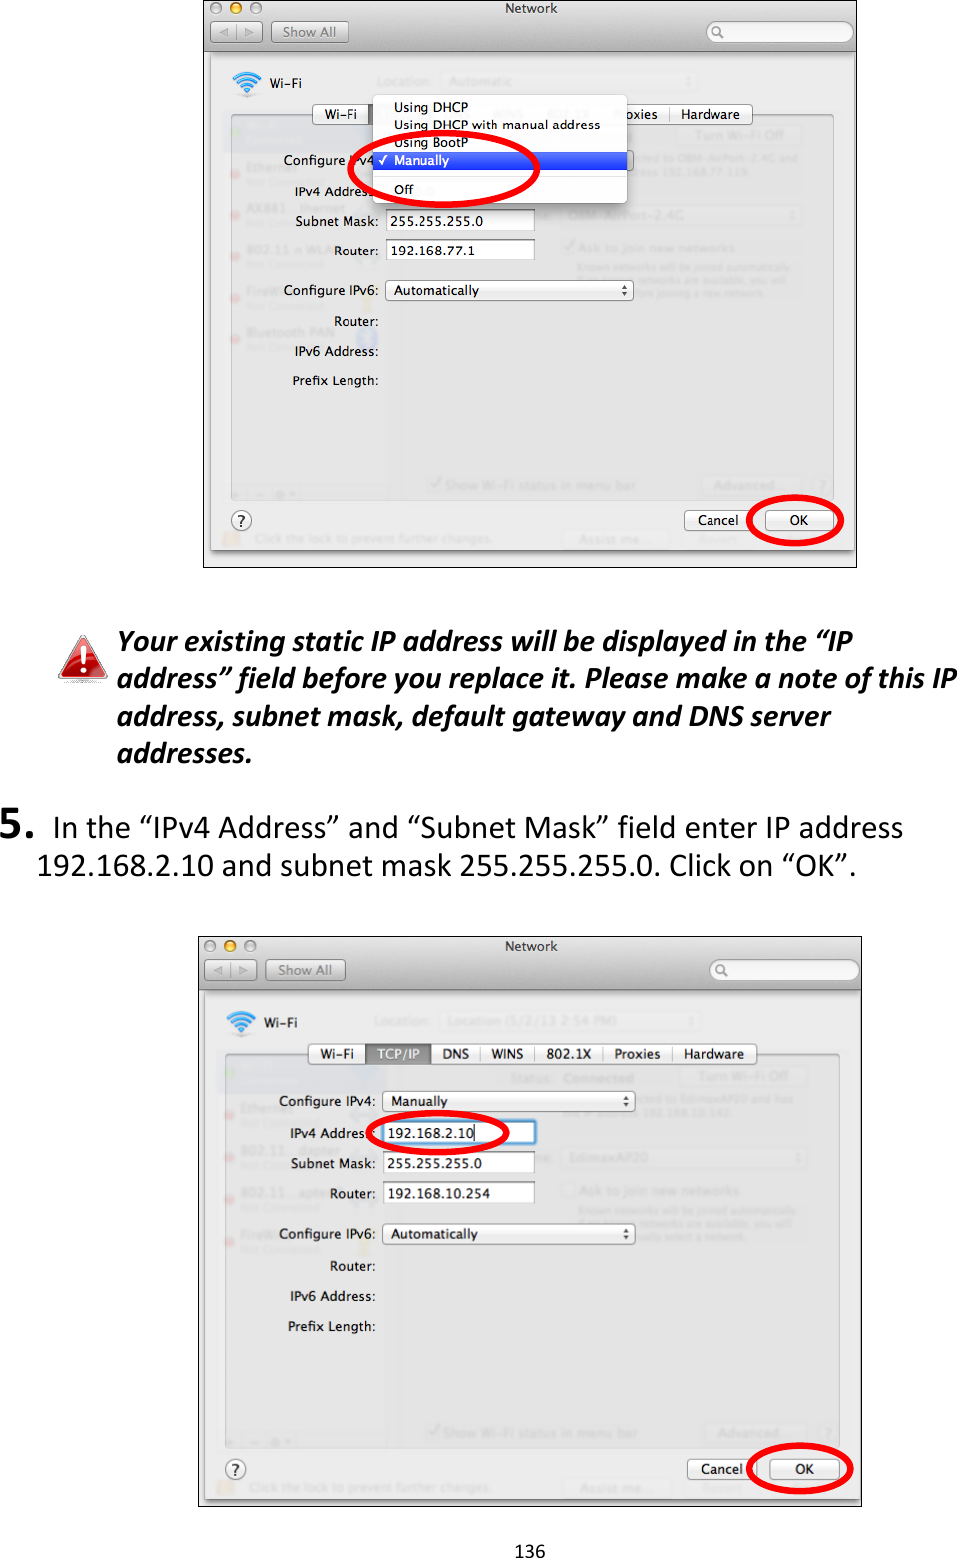 136    Your existing static IP address will be displayed in the “IP address” field before you replace it. Please make a note of this IP address, subnet mask, default gateway and DNS server addresses.  5.   In the “IPv4 Address” and “Subnet Mask” field enter IP address 192.168.2.10 and subnet mask 255.255.255.0. Click on “OK”.   